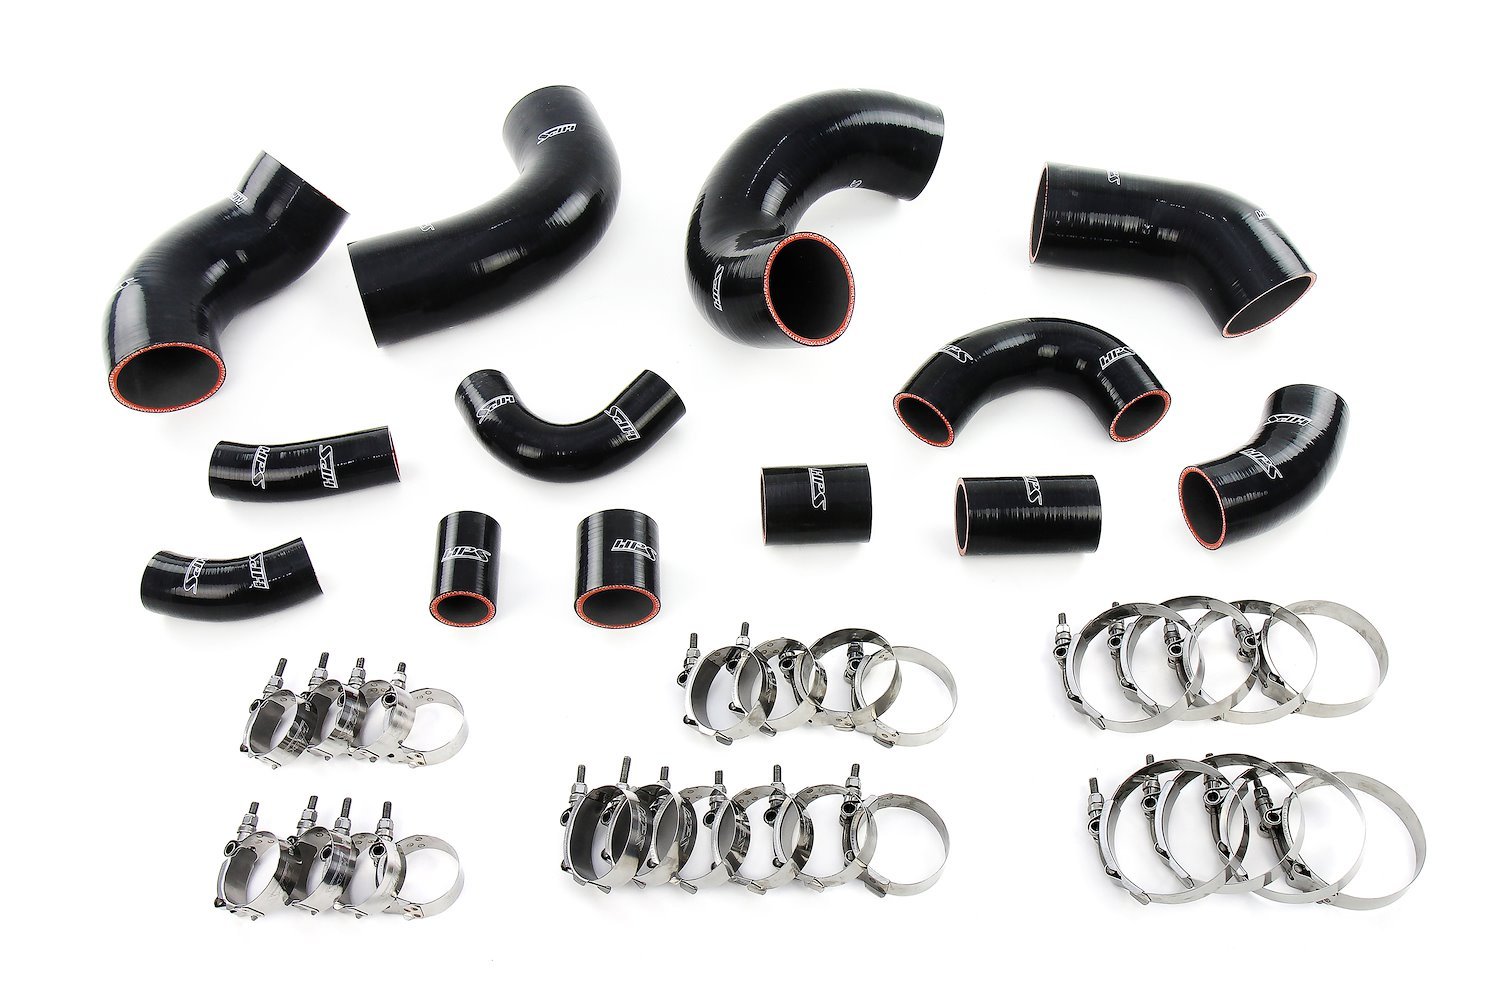 57-2097-BLK Intercooler Hose Kit, 4-Ply Reinforced Fluorolined Silicone, Replaces Rubber Intercooler Hoses